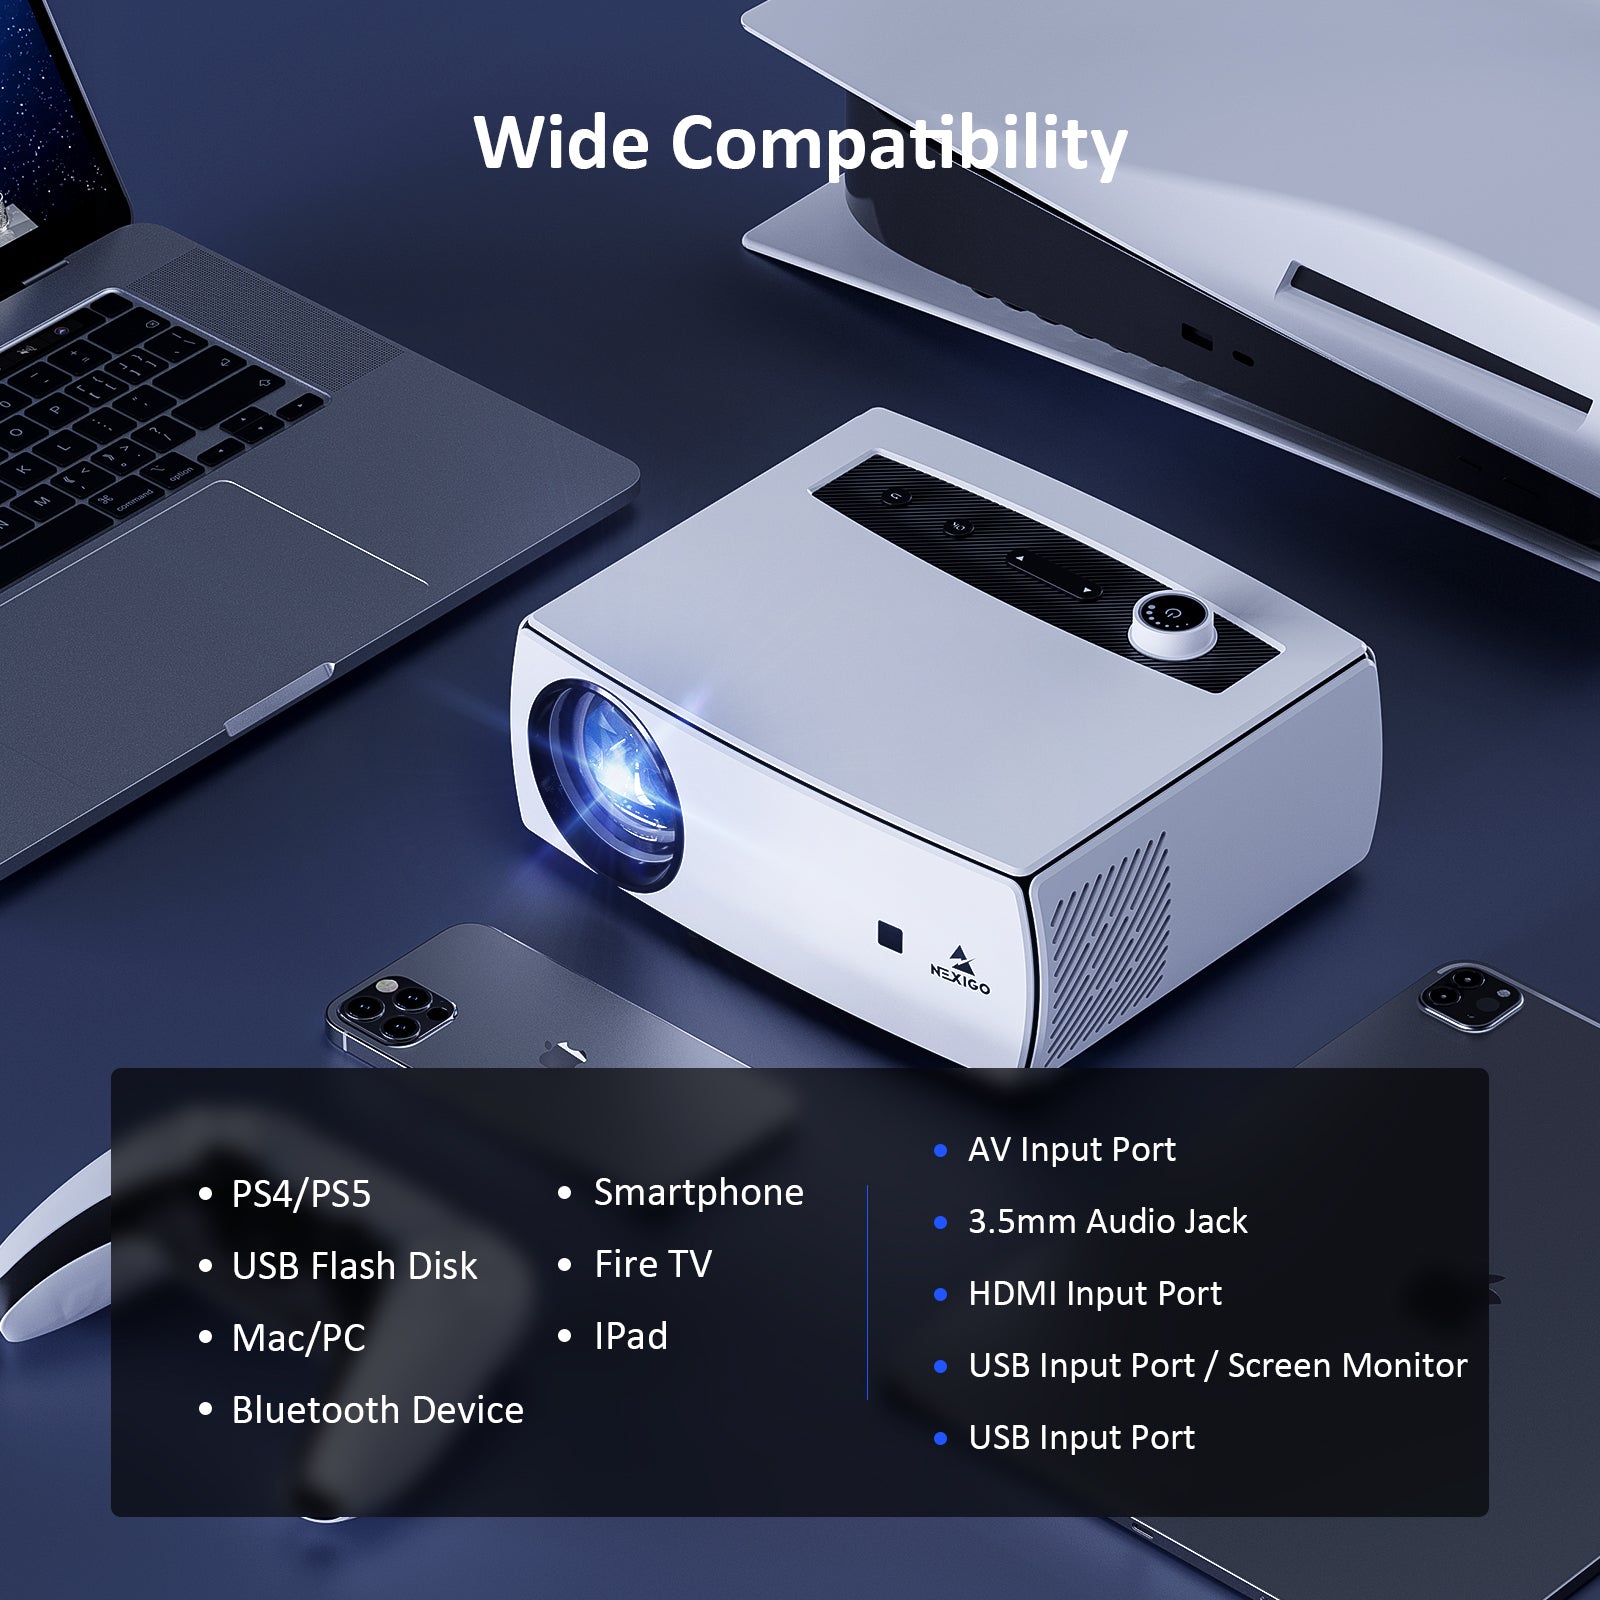 This projector features AV, 3.5mm audio, HDMI, and 2 USB ports. Support wide connection.